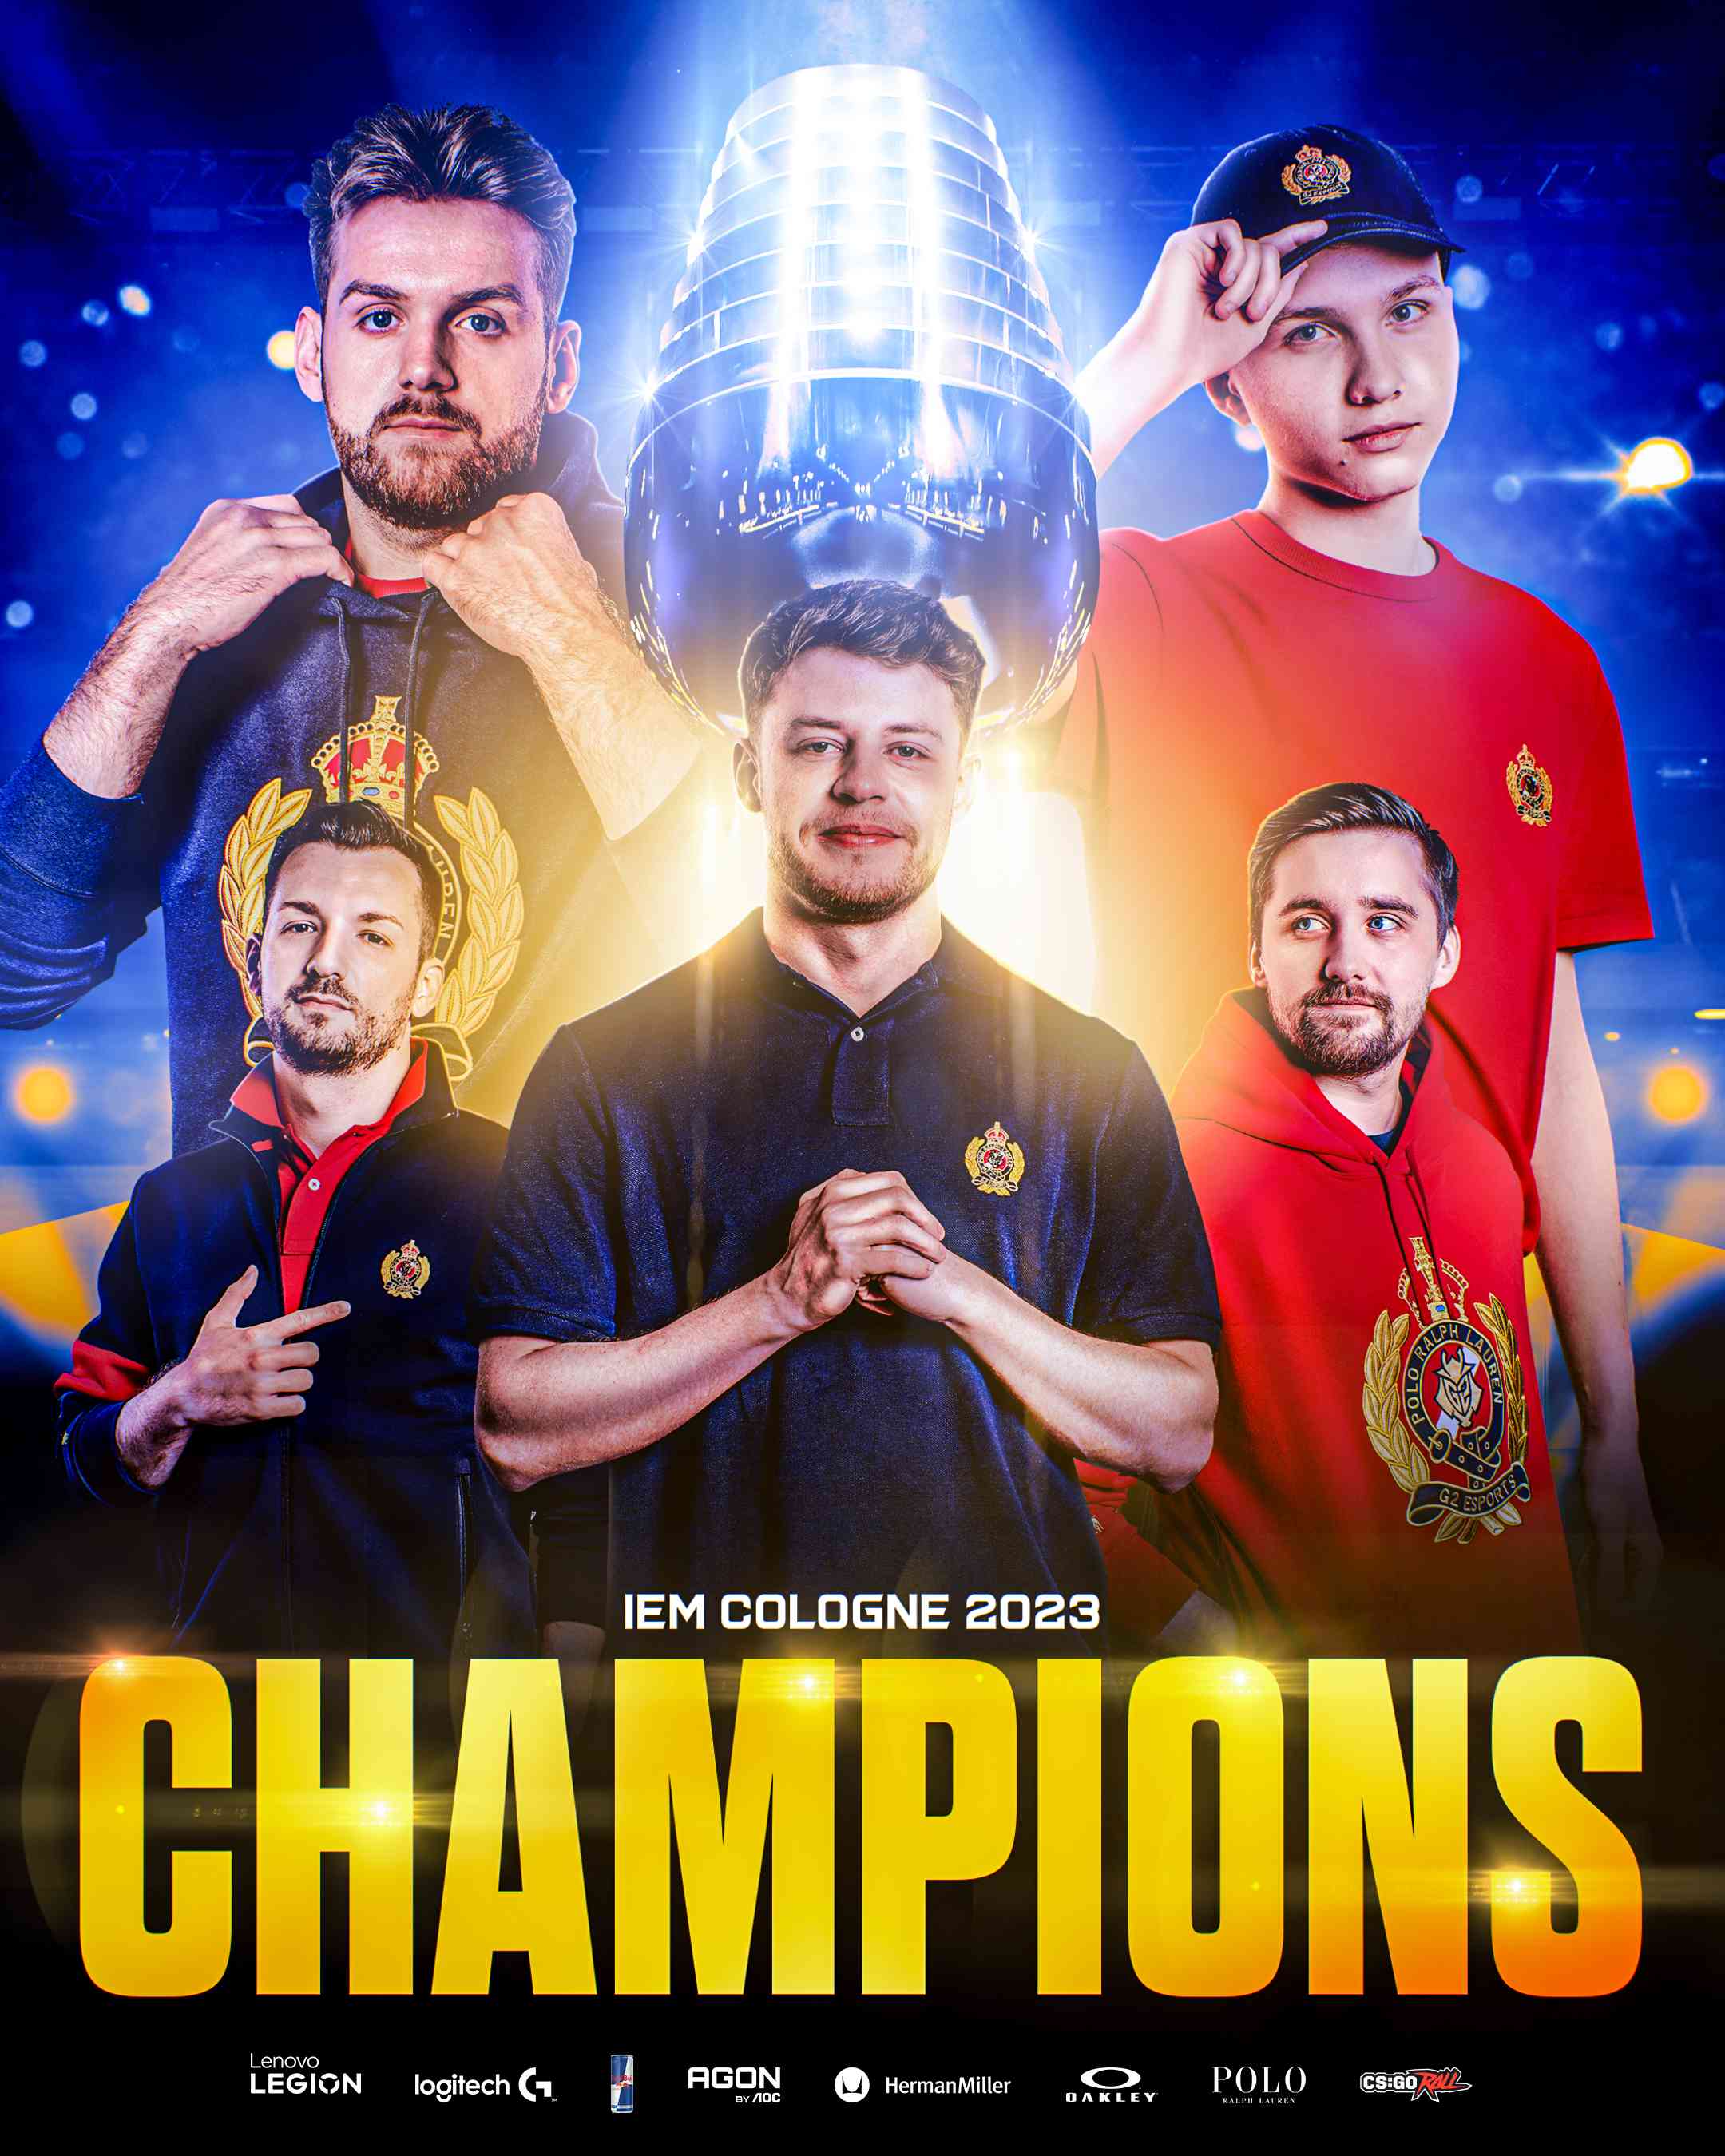 The roster for G2 appear in their team jerseys above the words "IEM Cologne 2023 Champions"